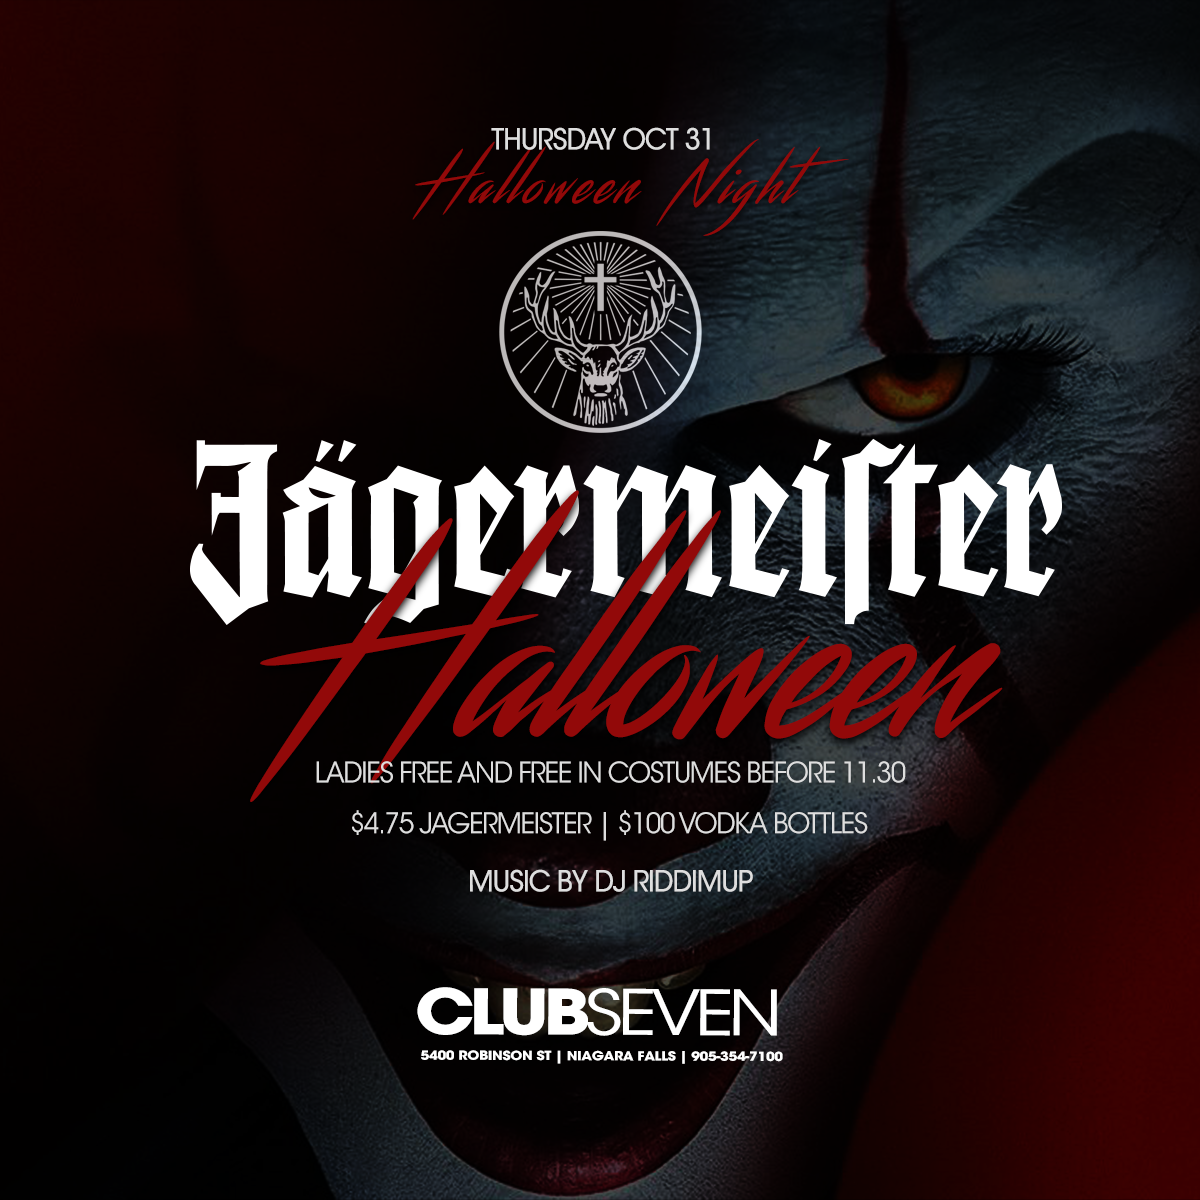 Club Seven - Special Events - Halloween 2019